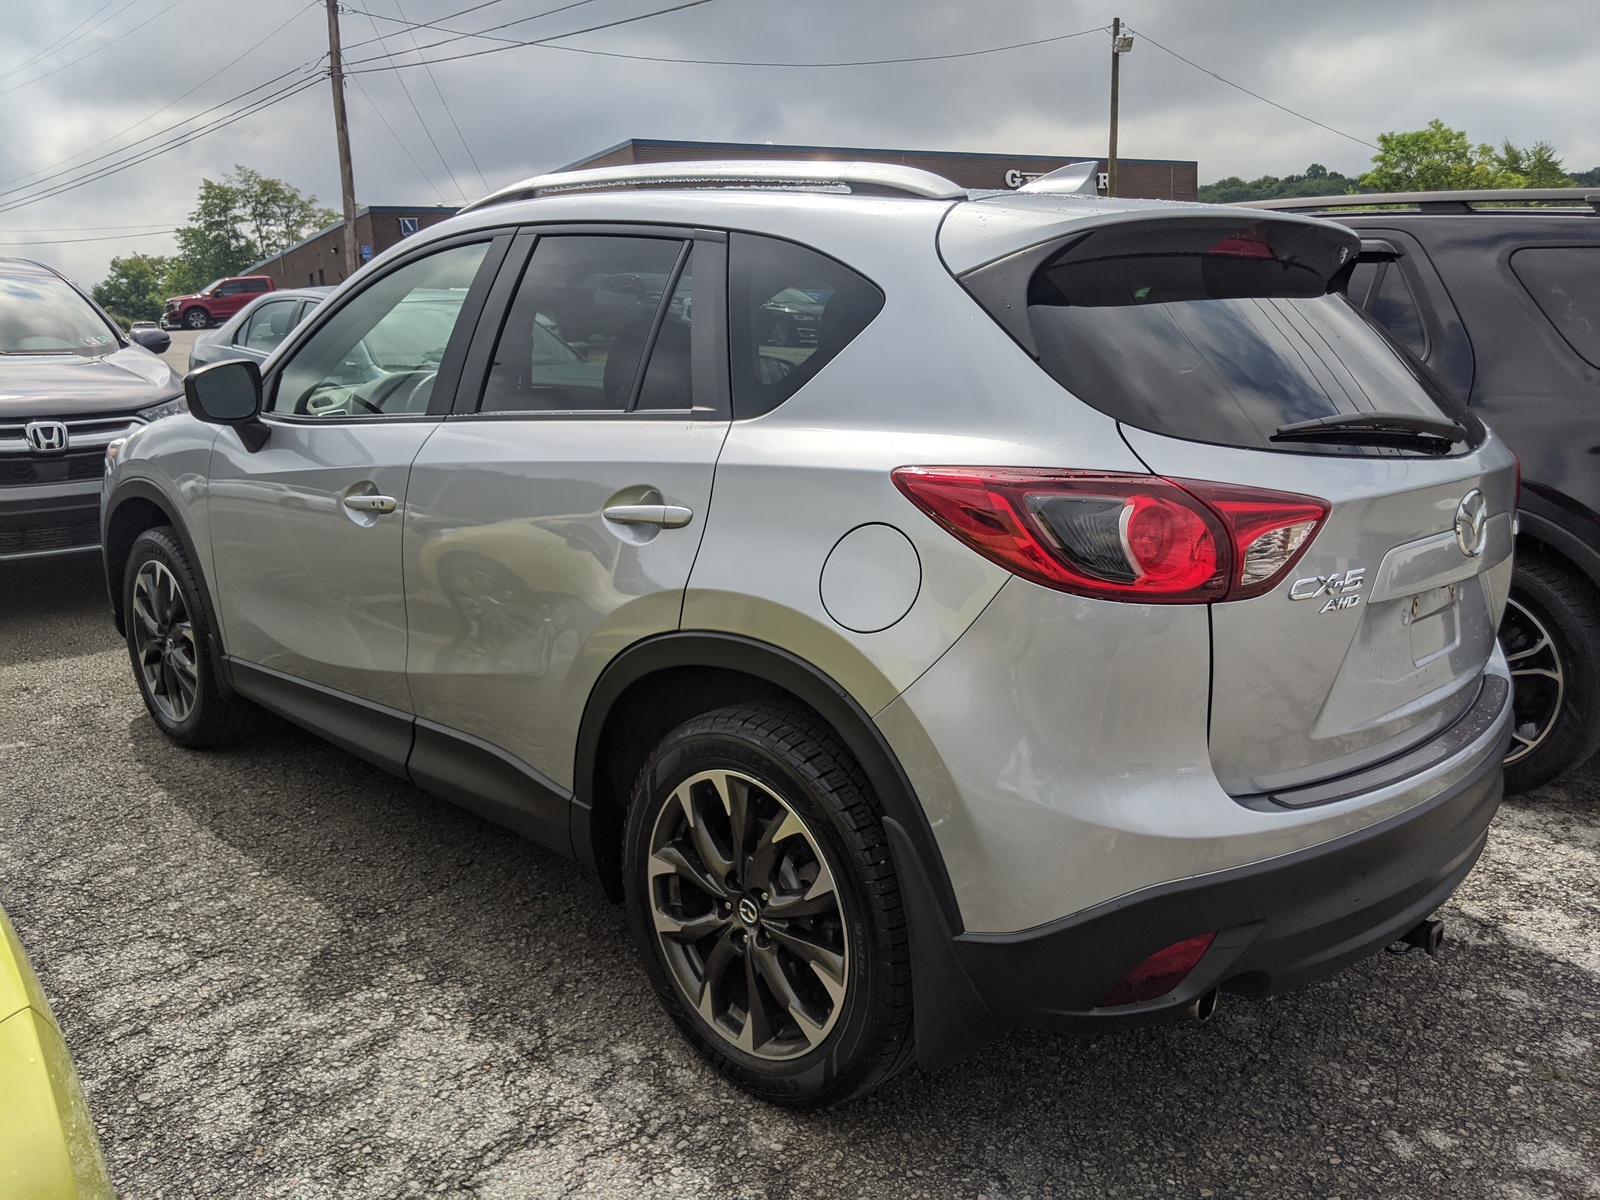 Certified PreOwned 2016 Mazda CX5 Grand Touring in SONIC